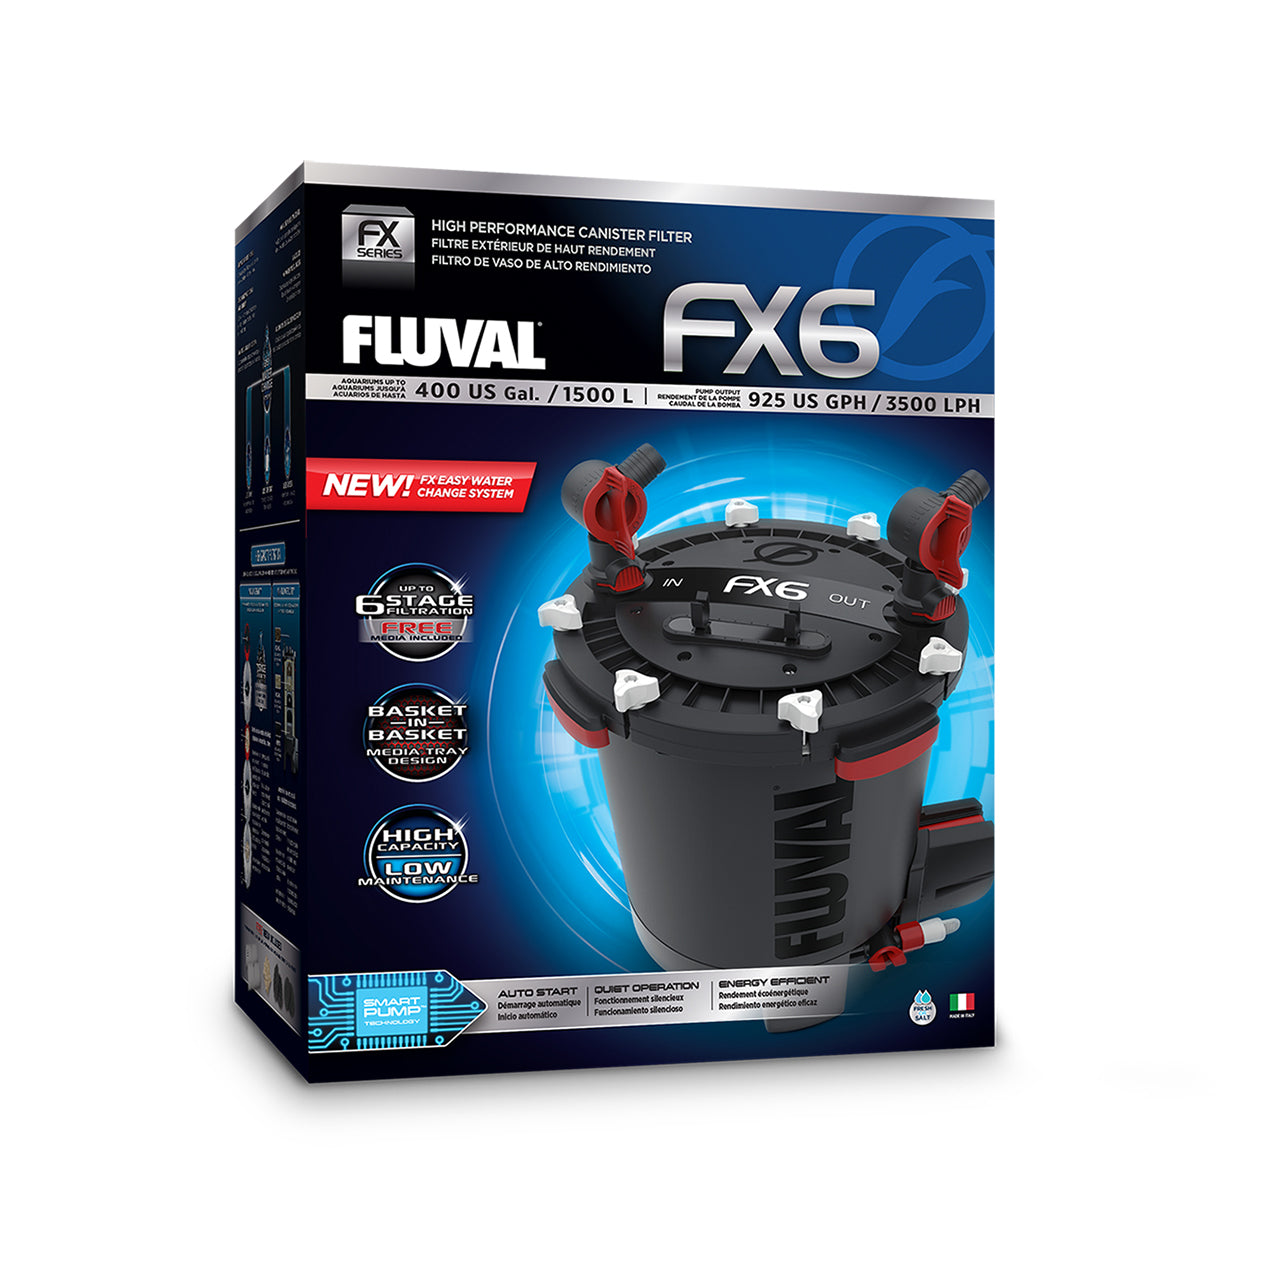 Fluval FX6 High Performance Canister Filter - up to 1500 L (400 US gal)